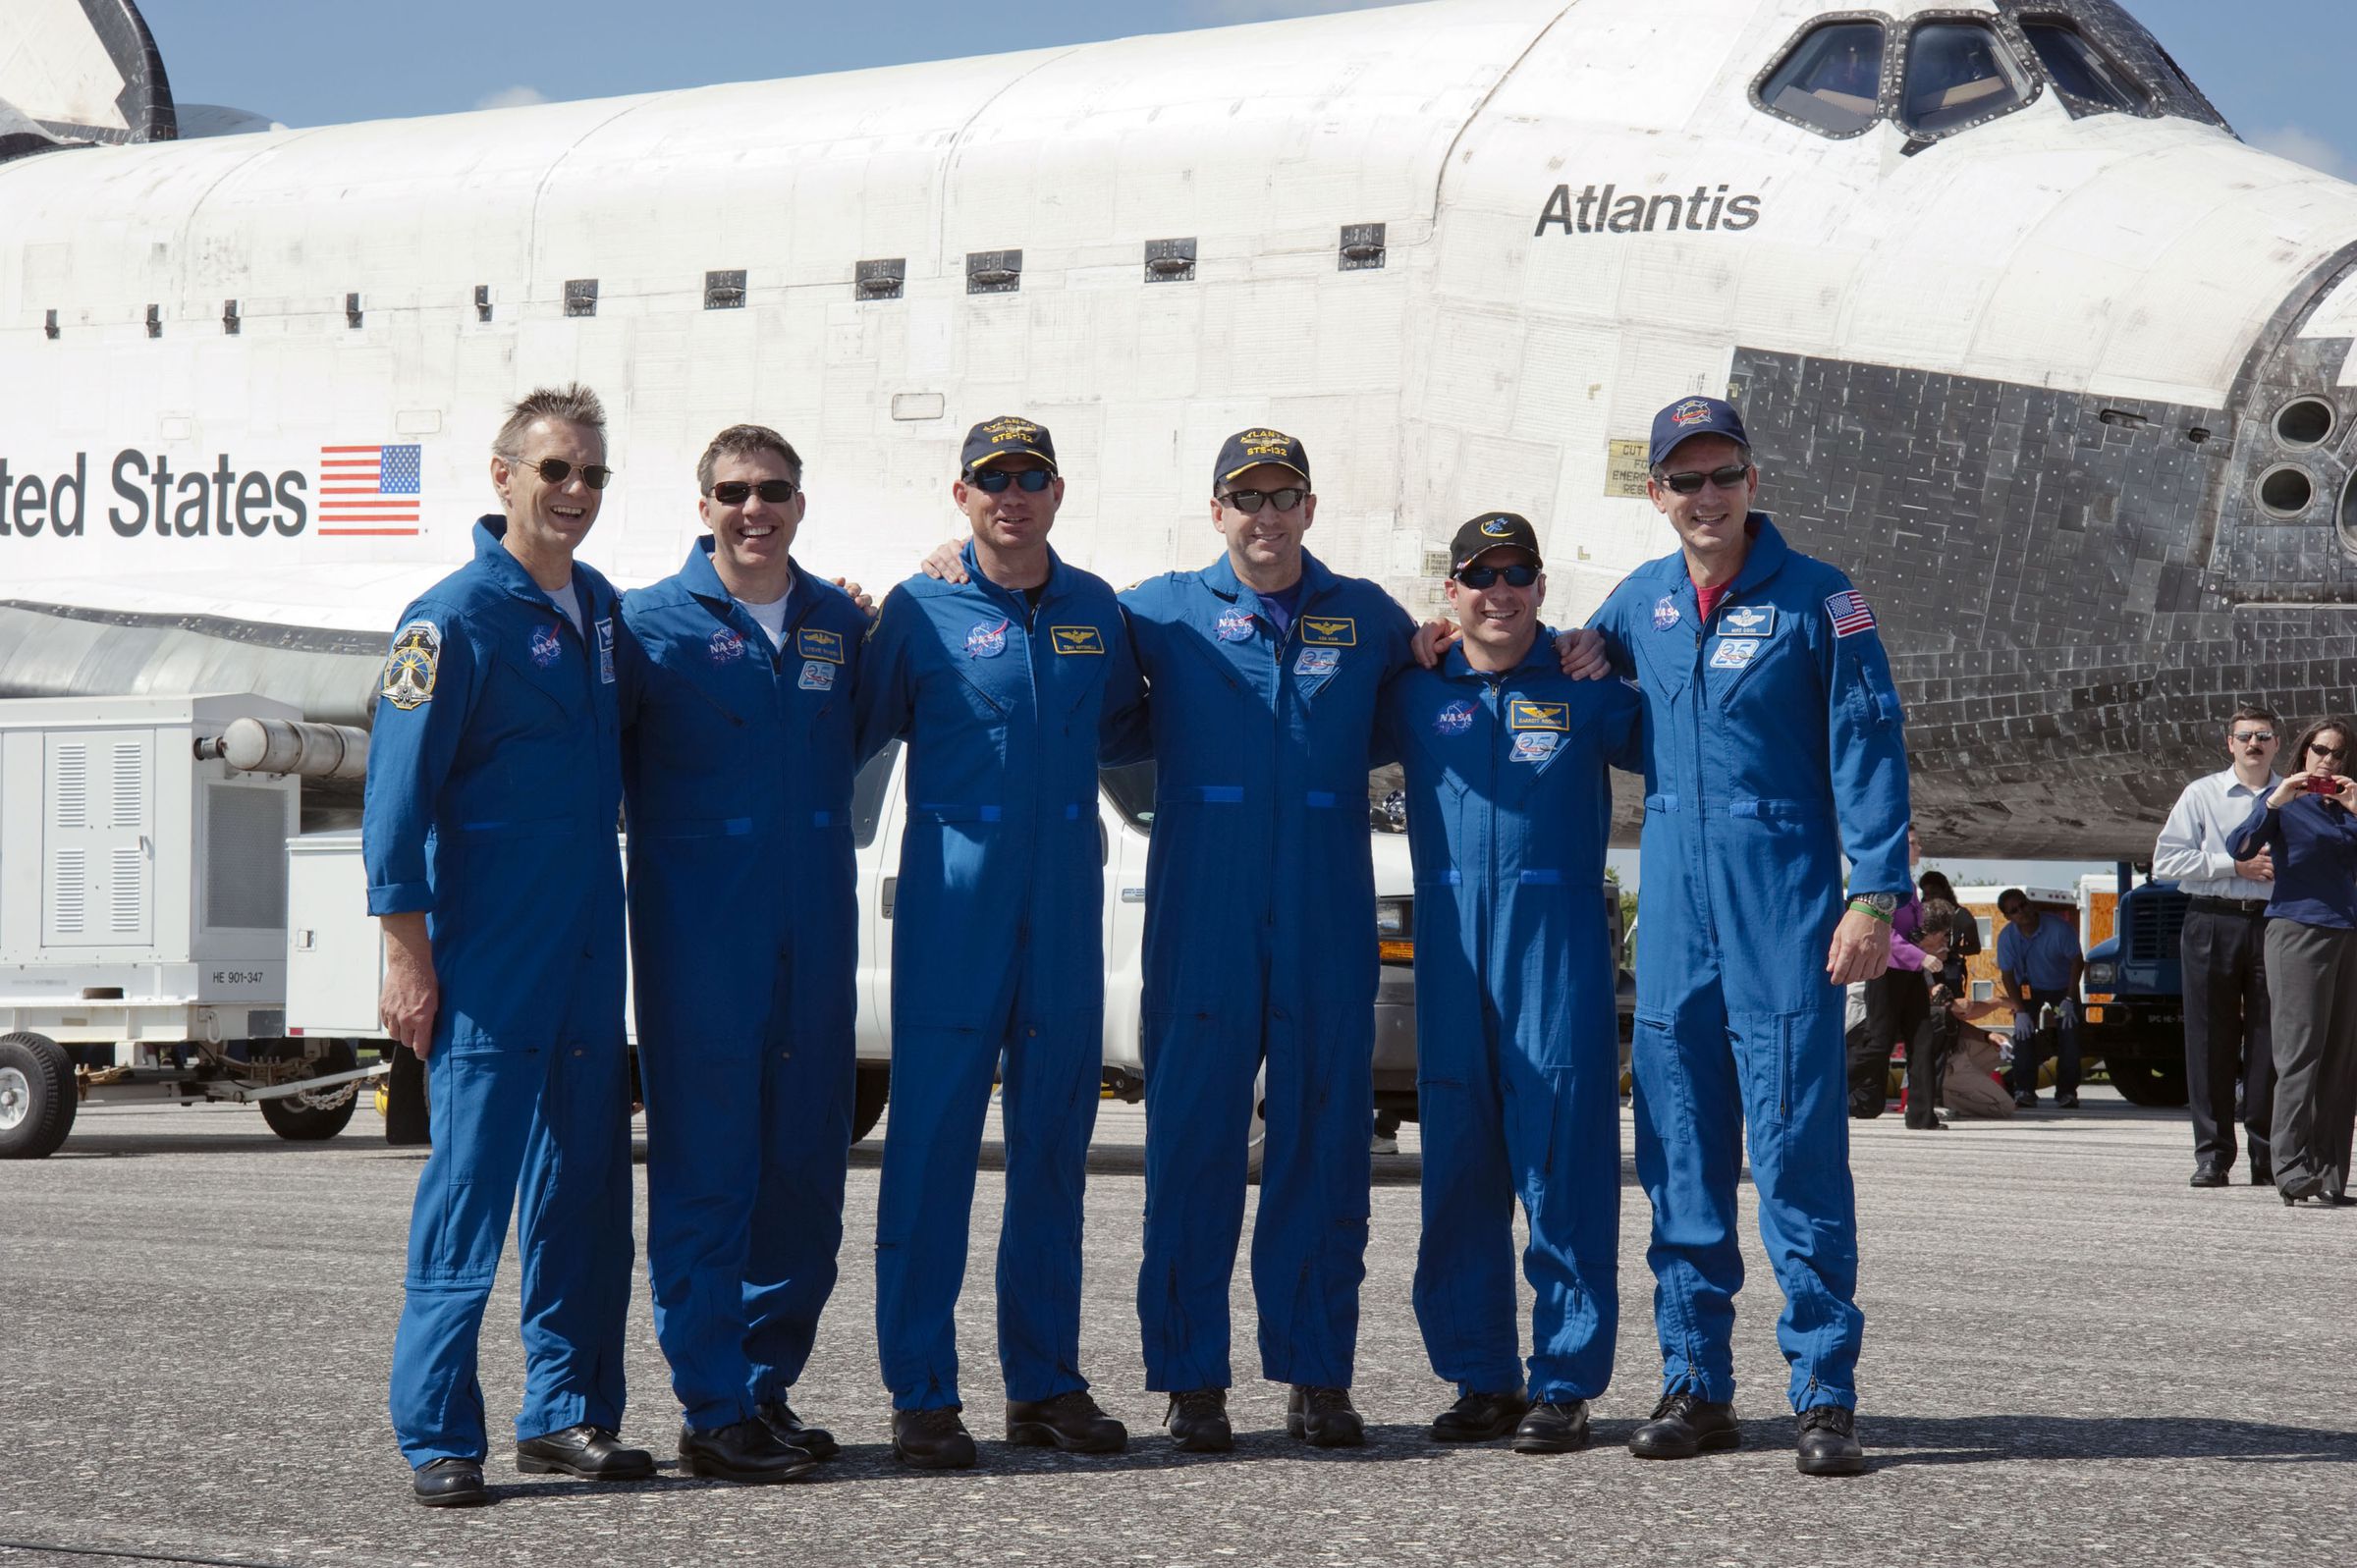 Garrett Reisman (second from right) stands with his crew in Cape Canaveral, after landing STS-132